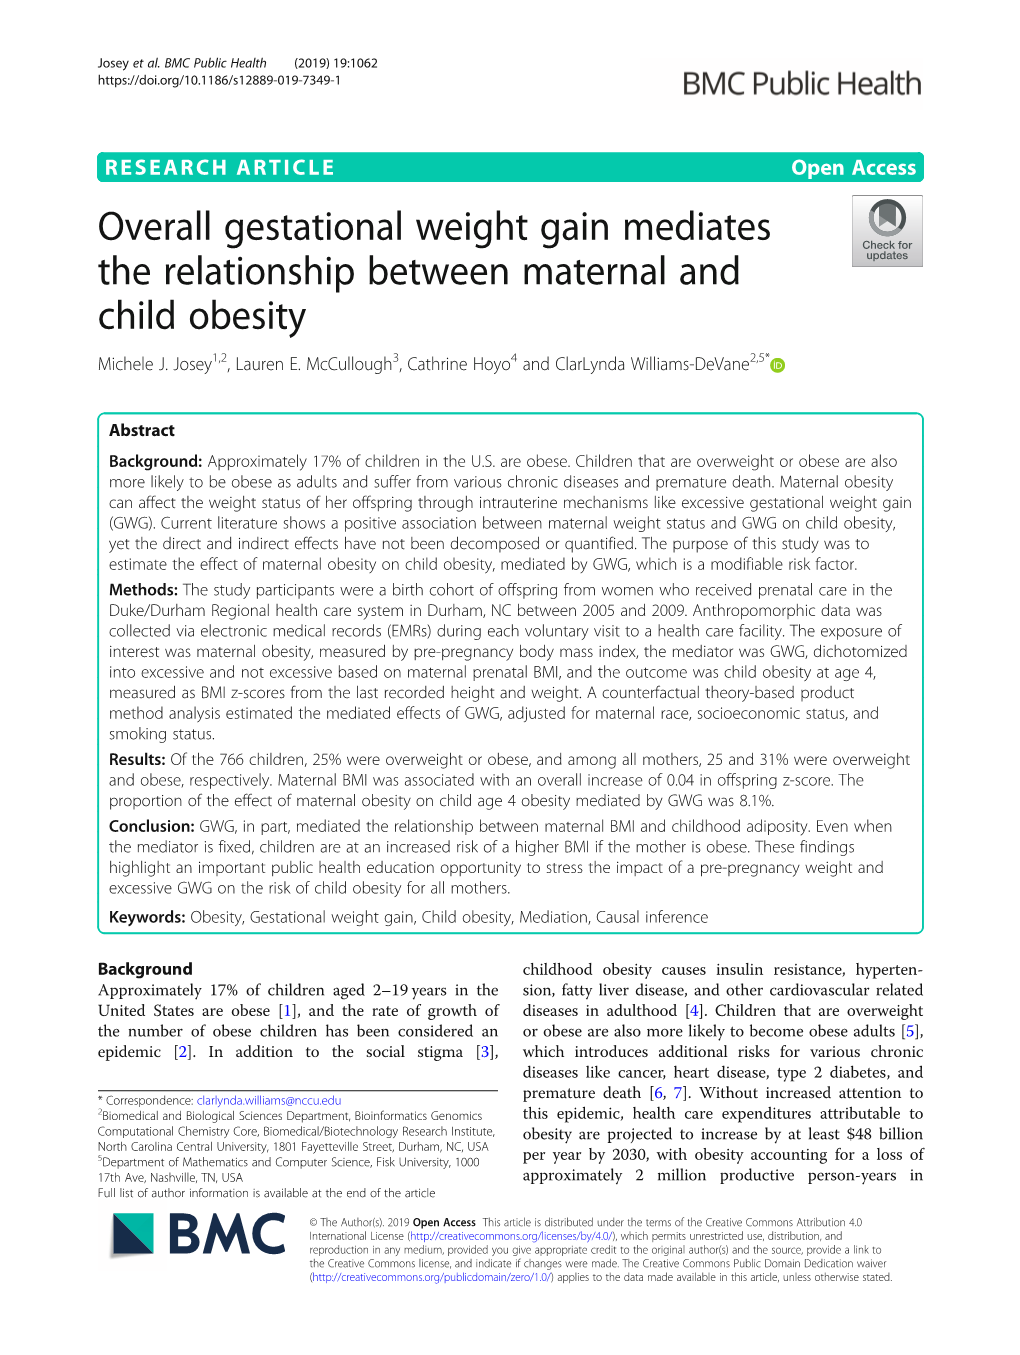 Overall Gestational Weight Gain Mediates the Relationship Between Maternal and Child Obesity Michele J